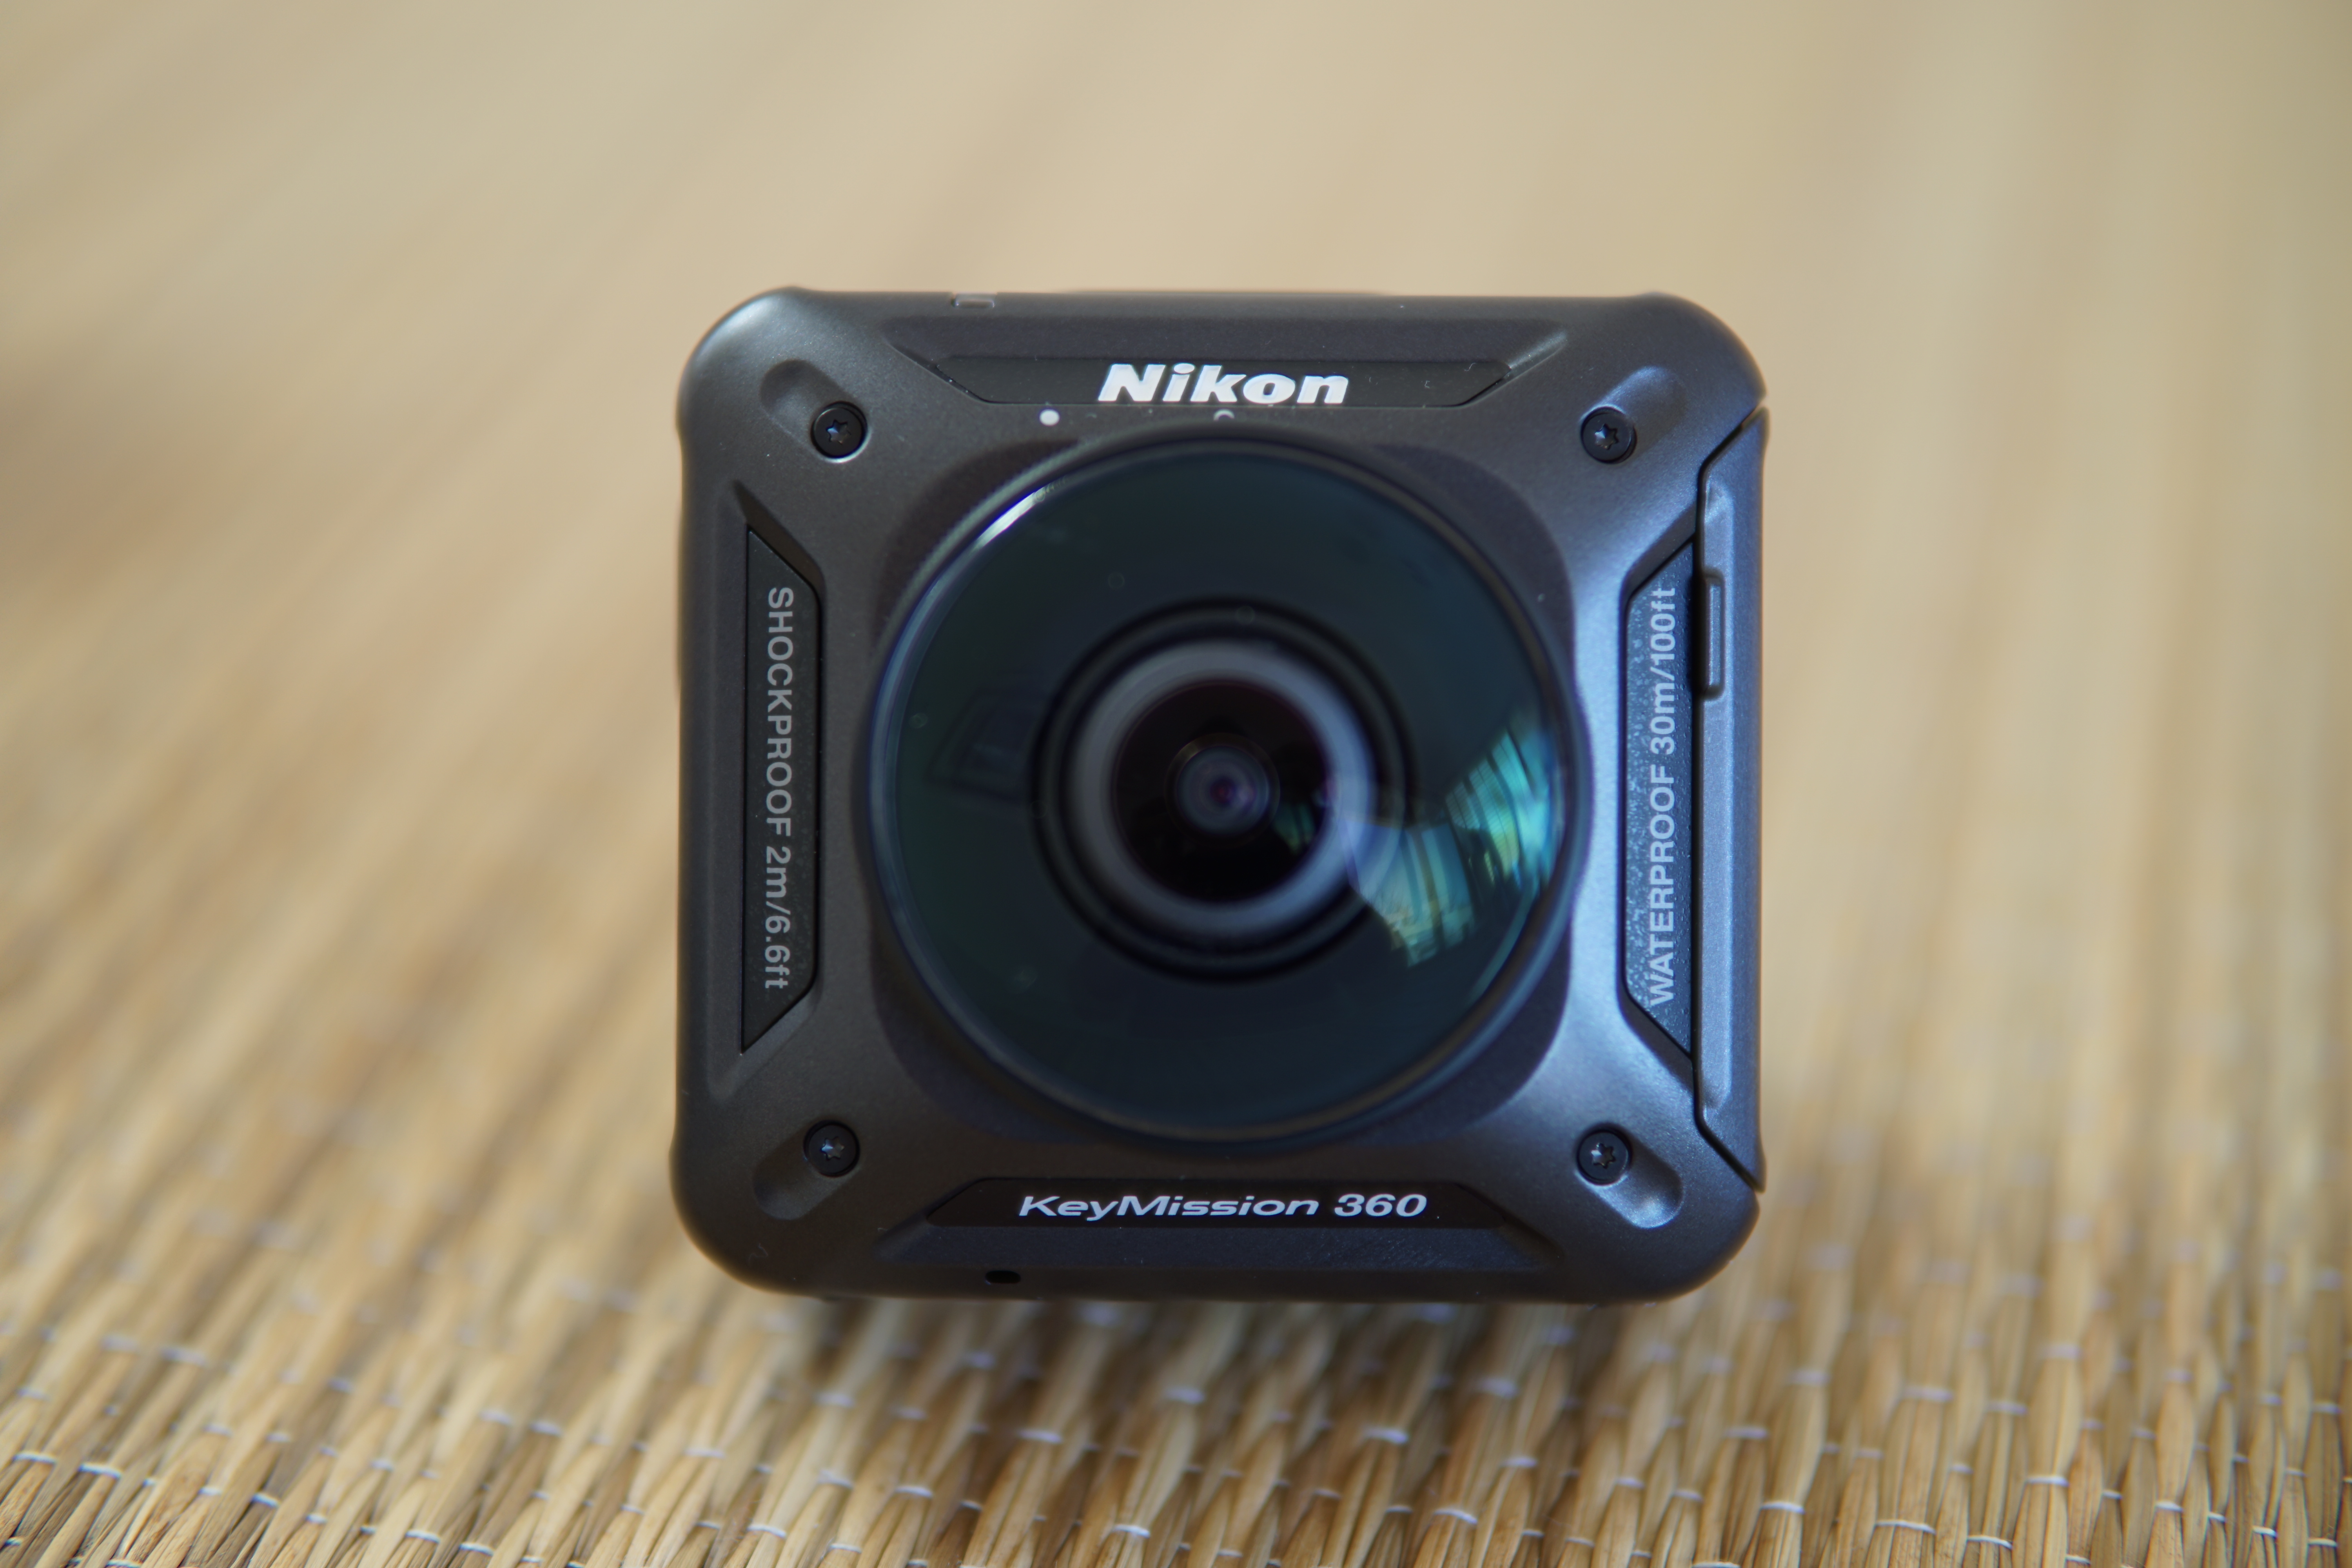 The Nikon KeyMission 360 is capable of 4K video and underwater usage